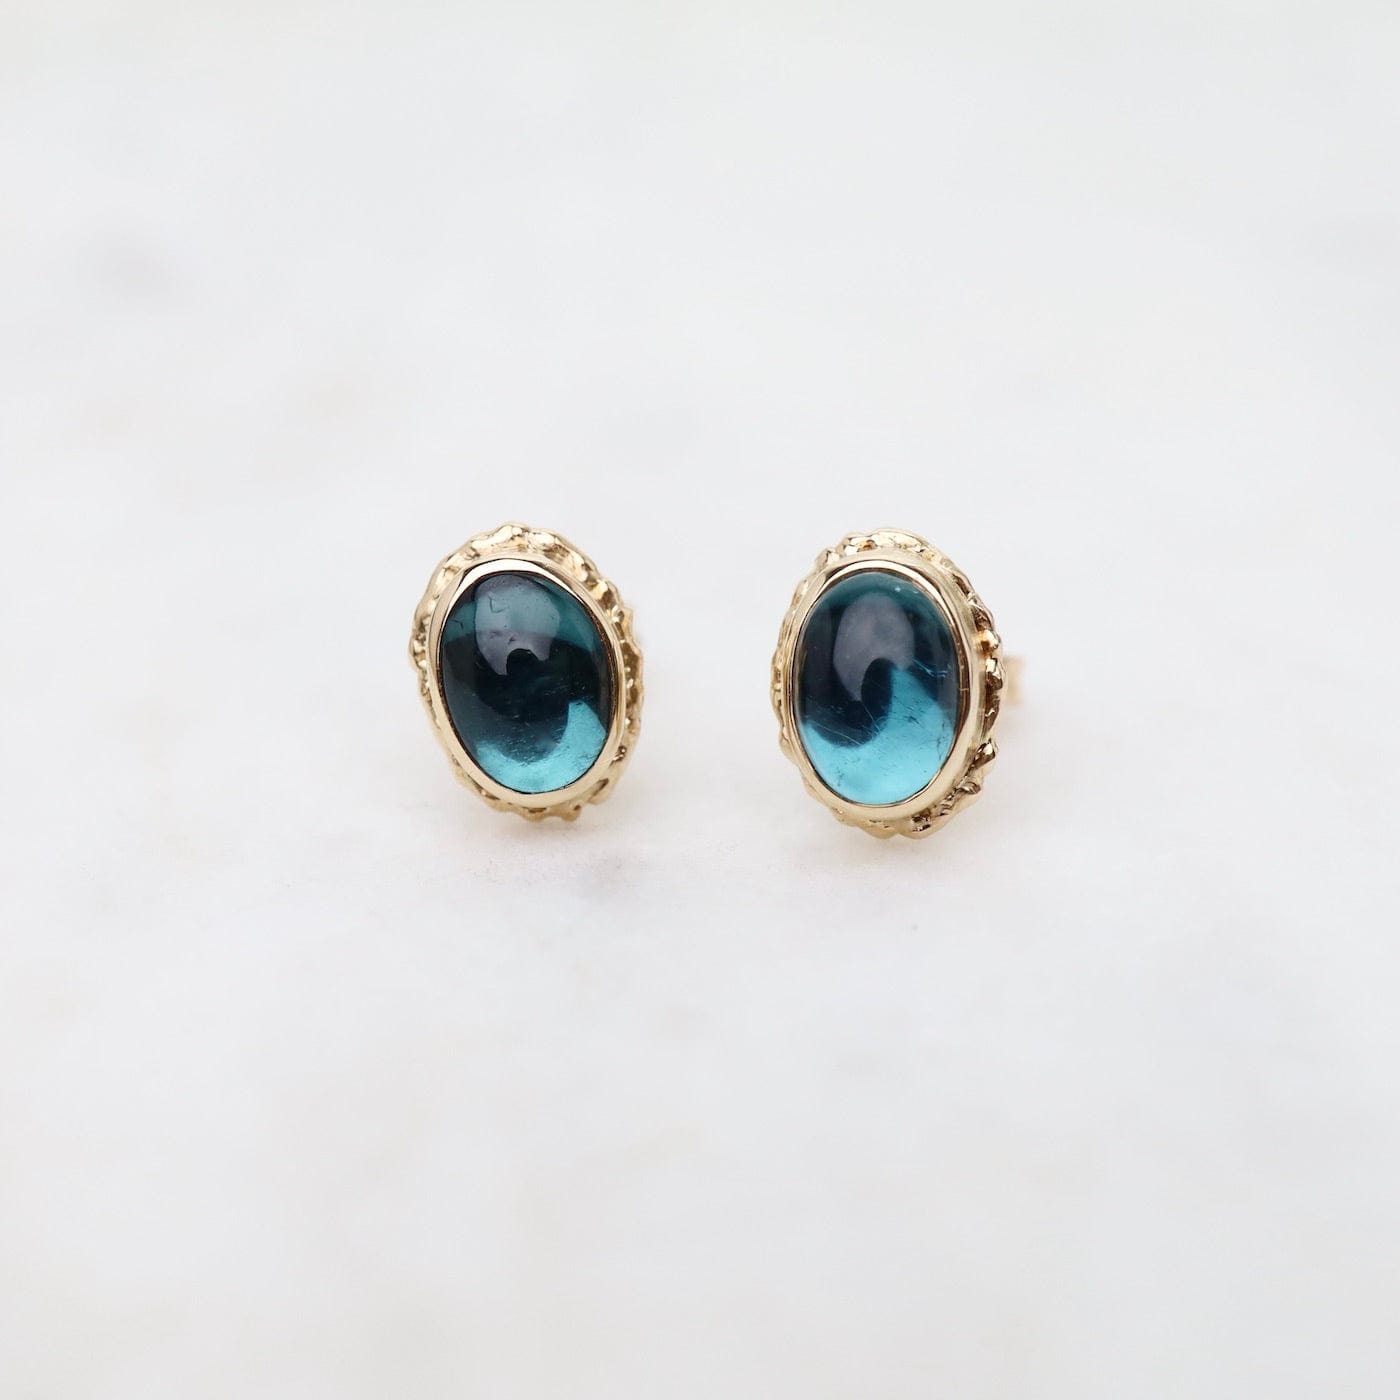 EAR-14K 14K Gold Post Earrings with Oval Smooth Indicolite